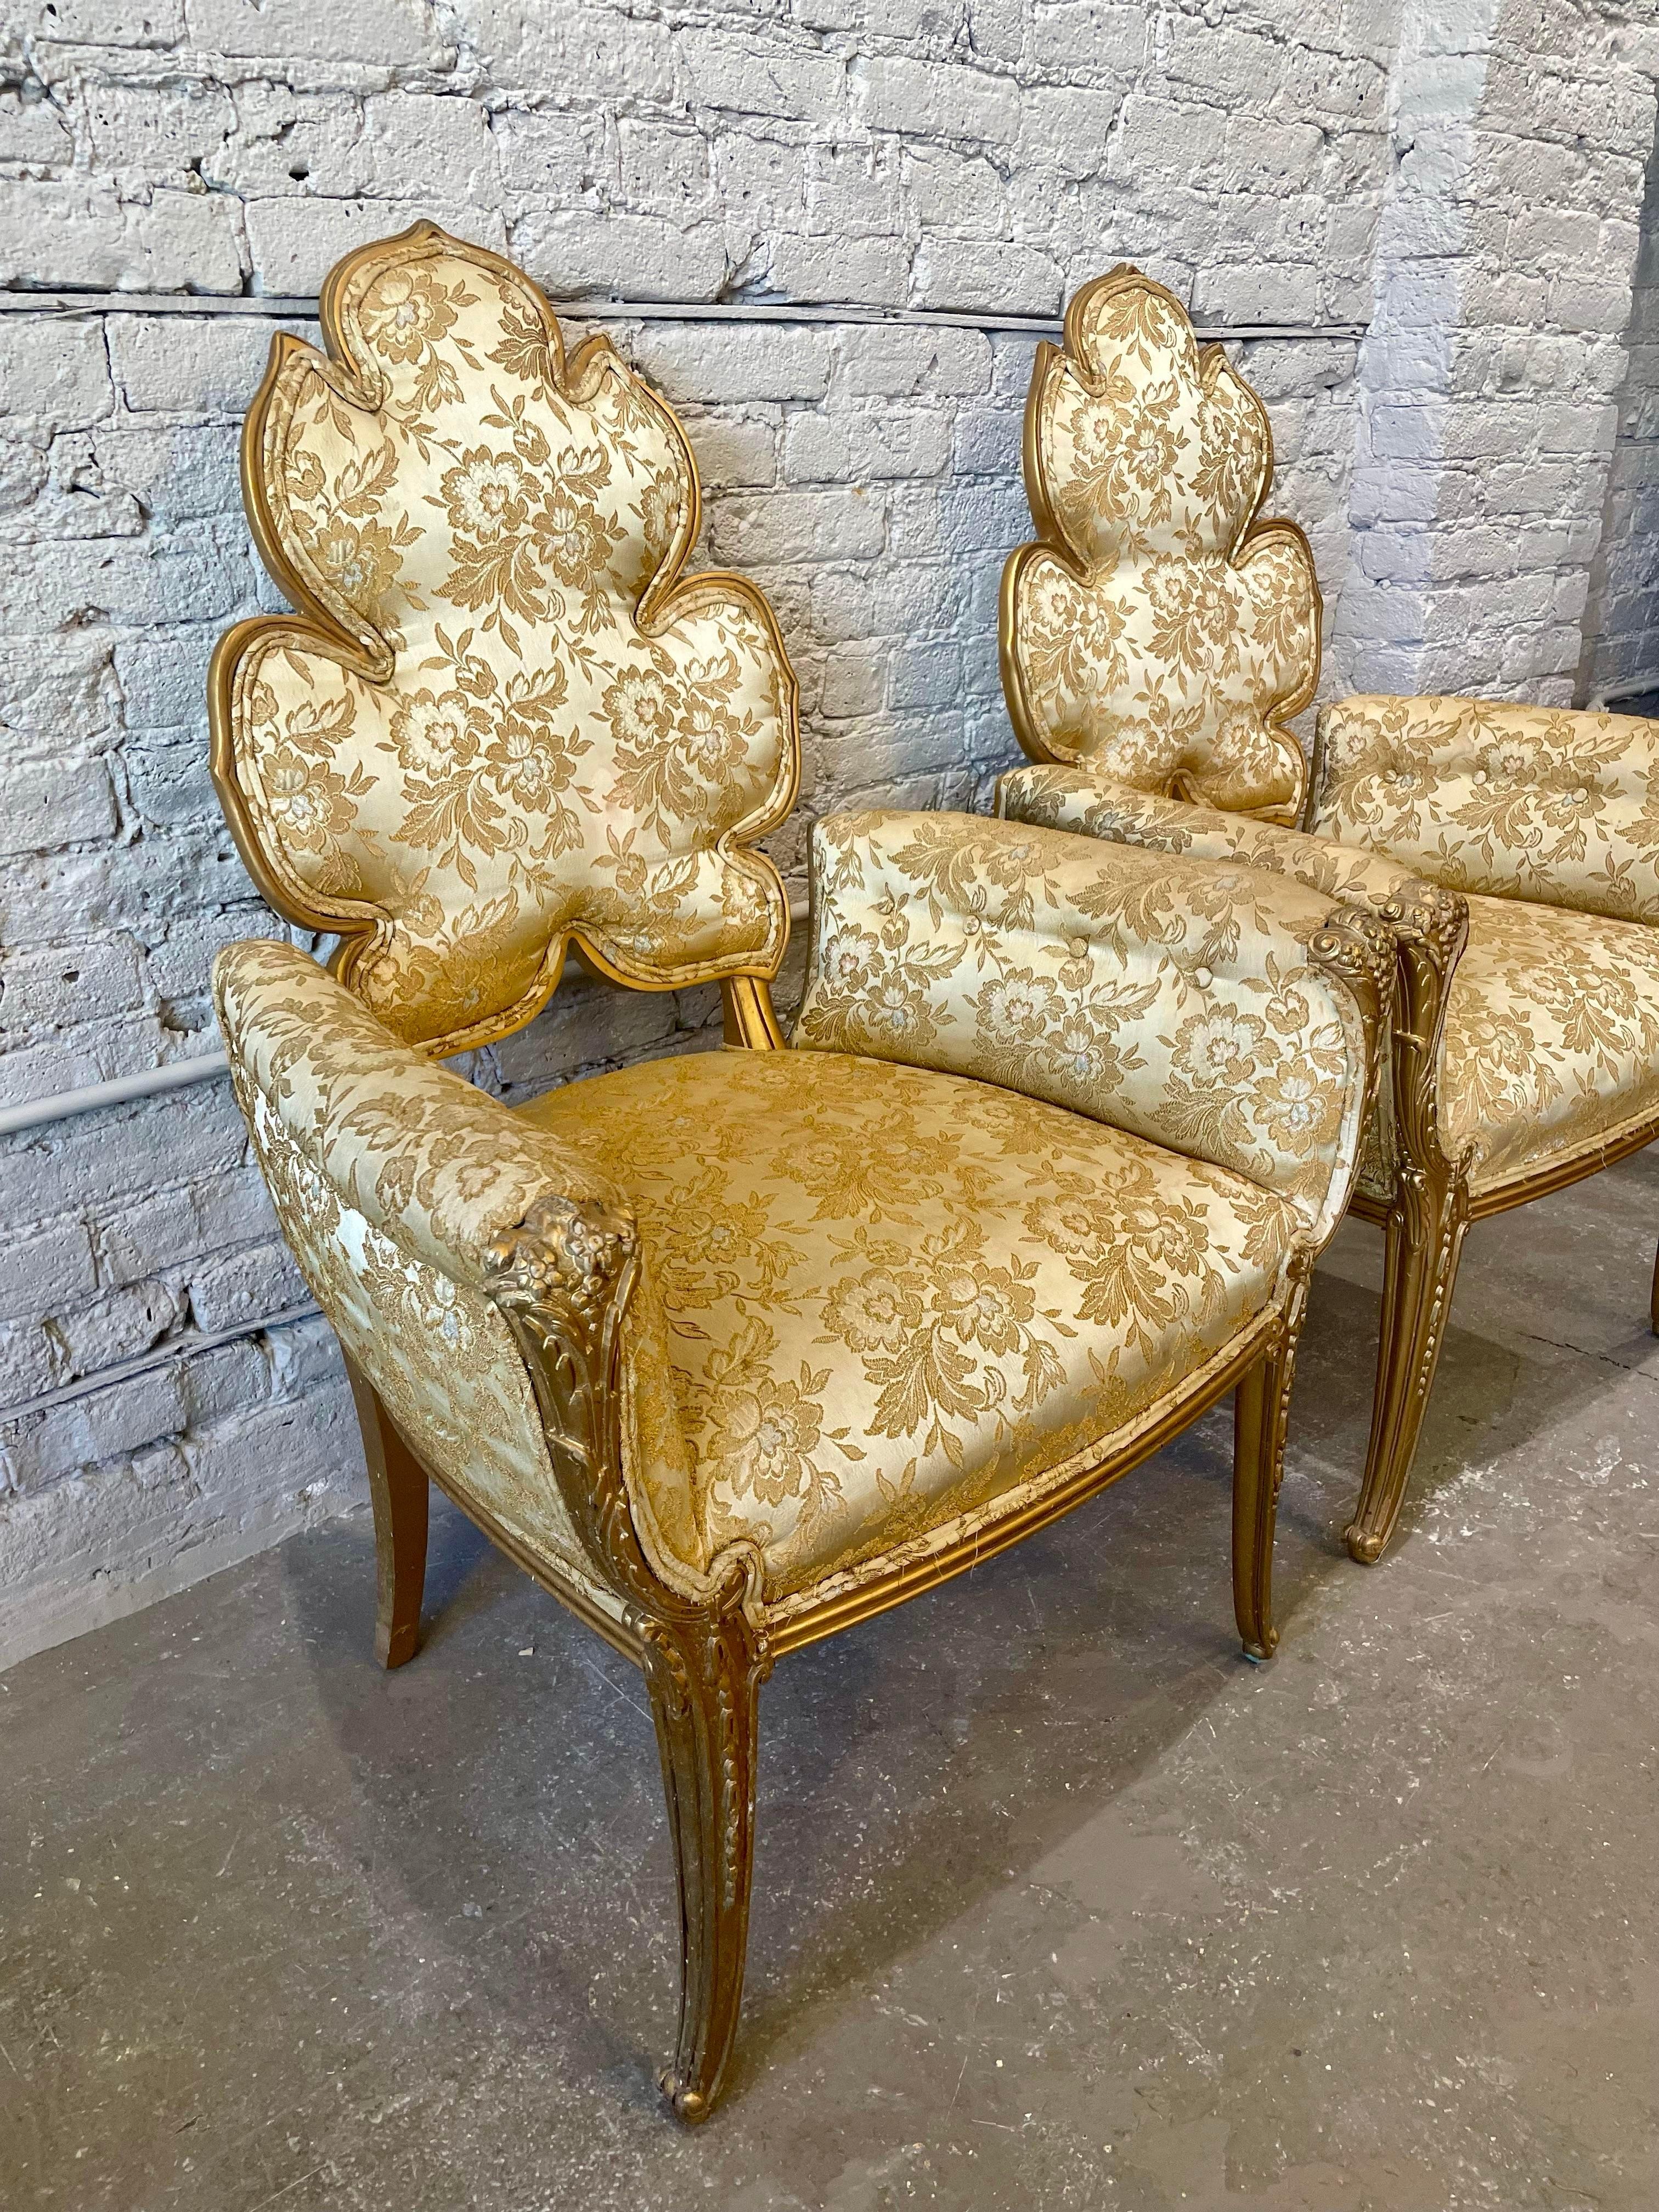 1940s Grosfeld House Leaf Flower Chairs - a Pair For Sale 3